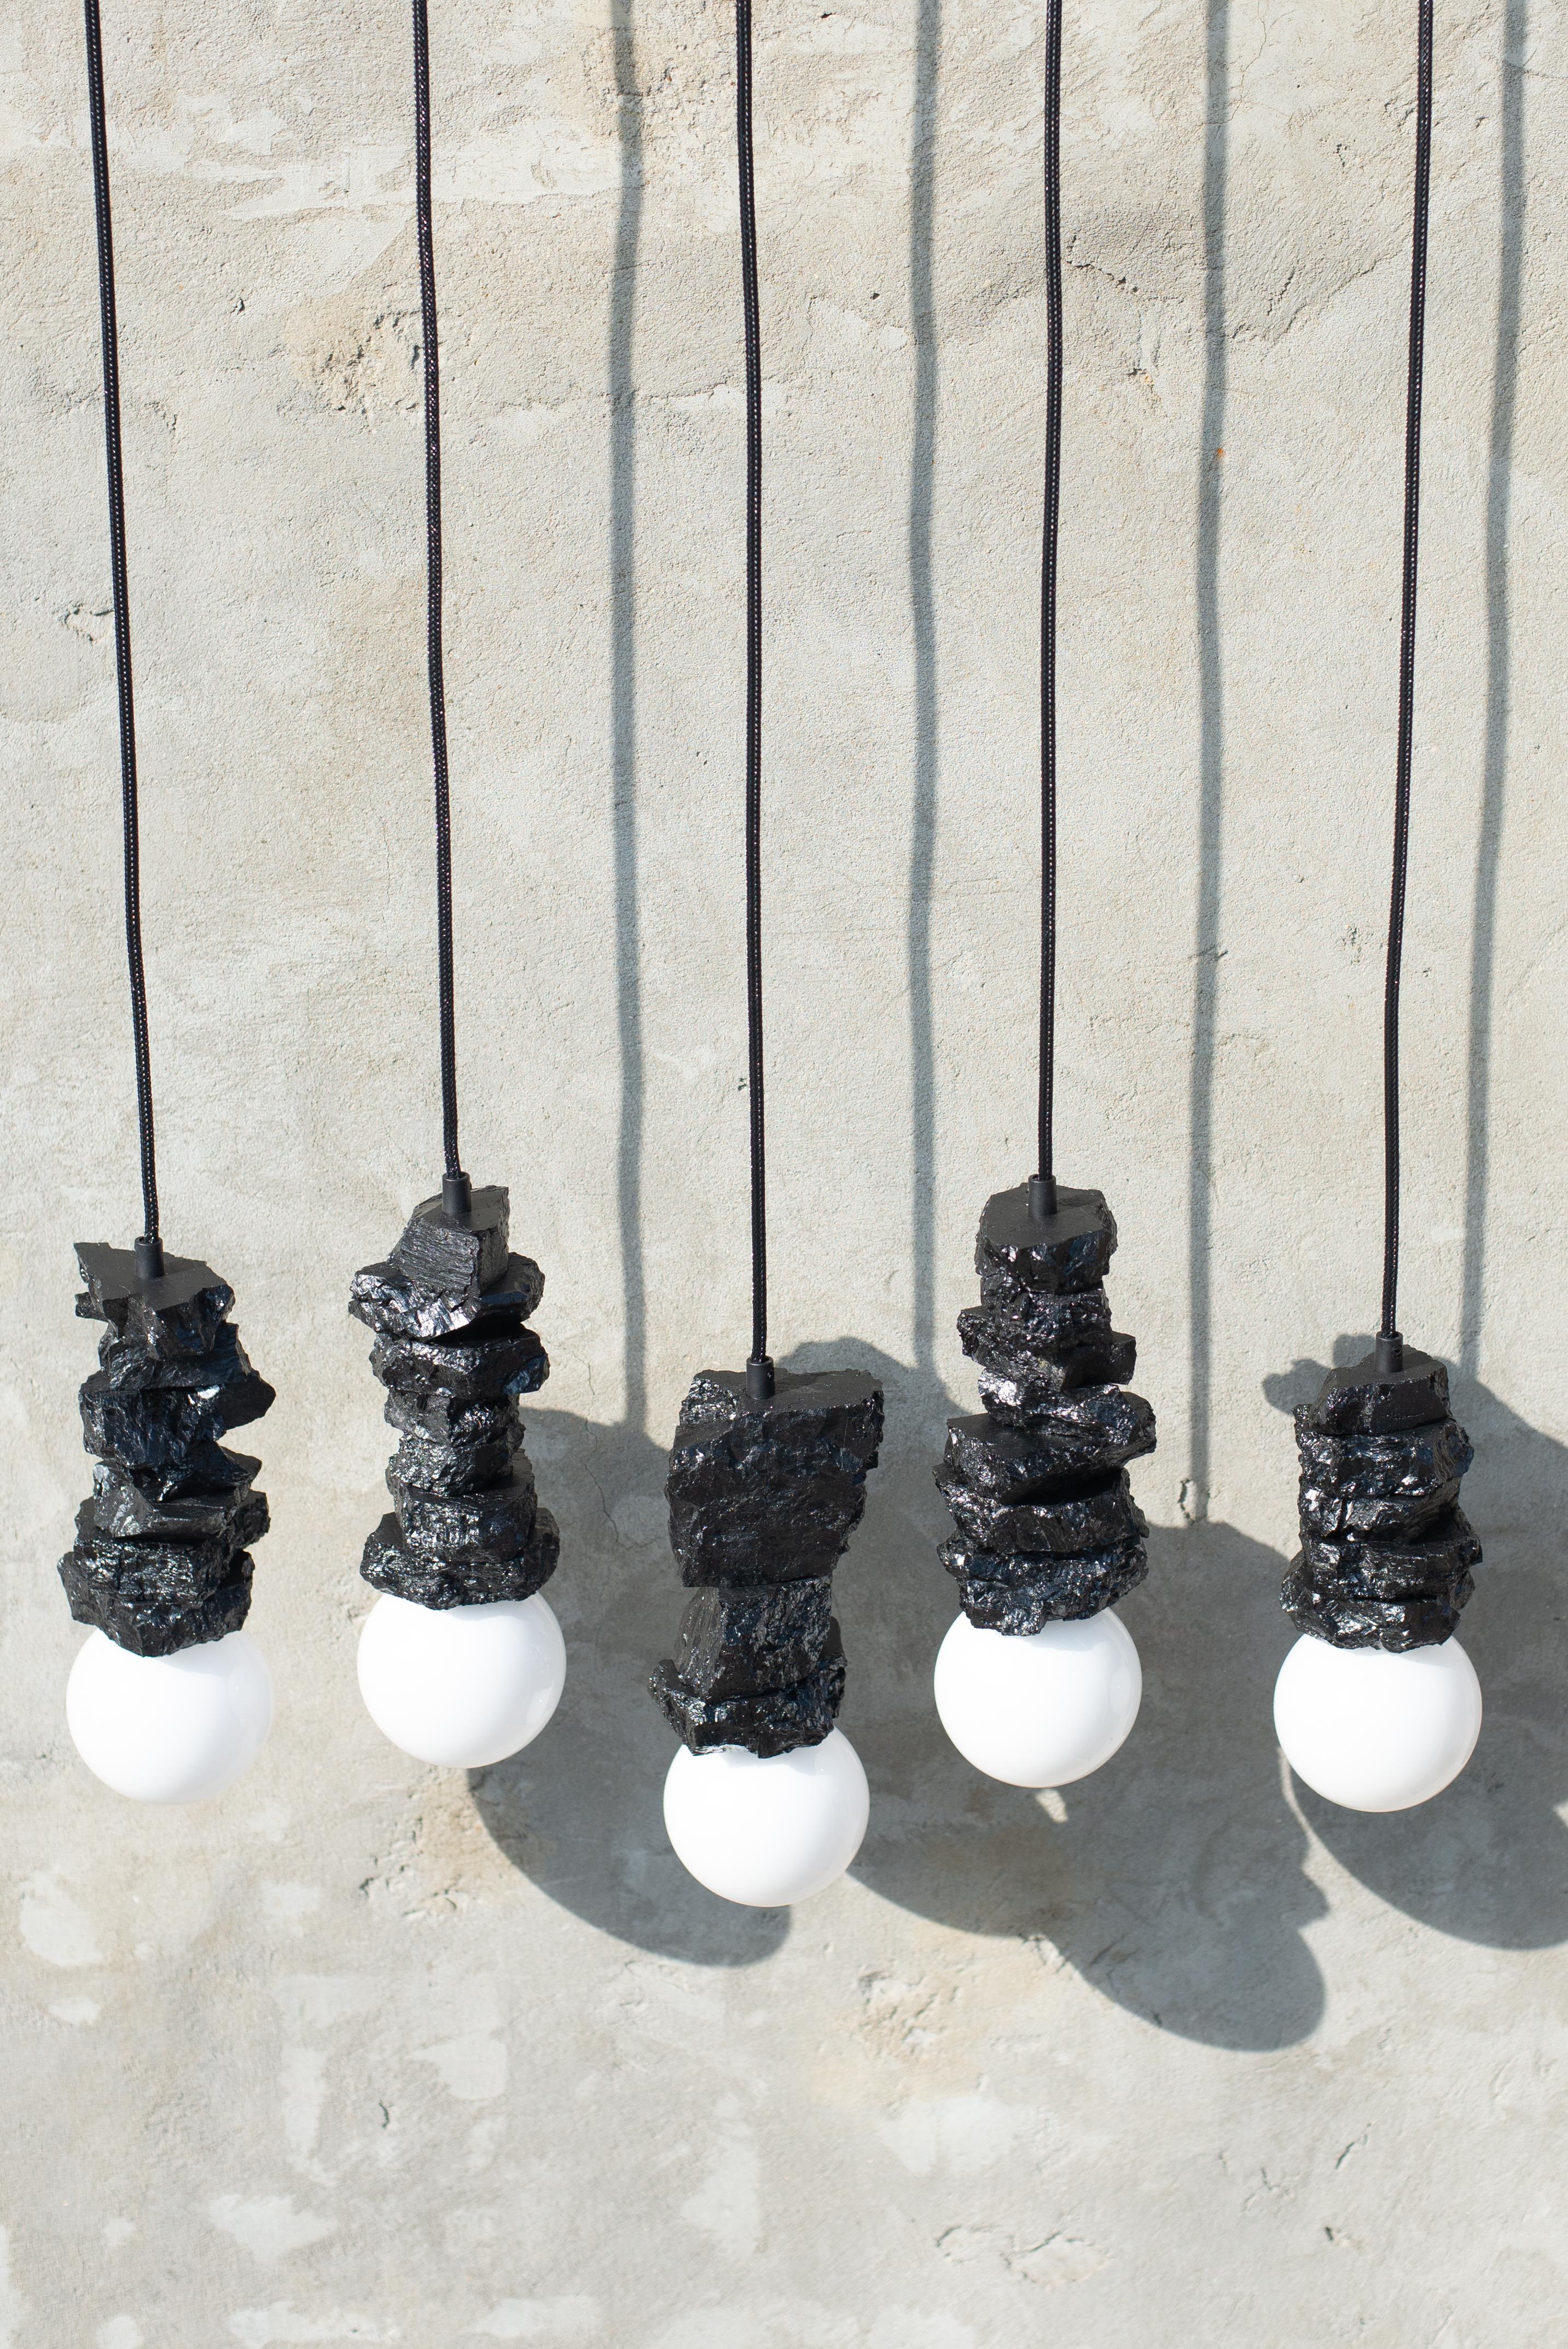 Set of 5 pendant lights 020 by Jesper Eriksson
Dimensions: D20 x H40 cm 
Materials: Anthracite Coal, Opal Glass
Weight: 5 kg

All our lamps can be wired according to each country. If sold to the USA it will be wired for the USA for